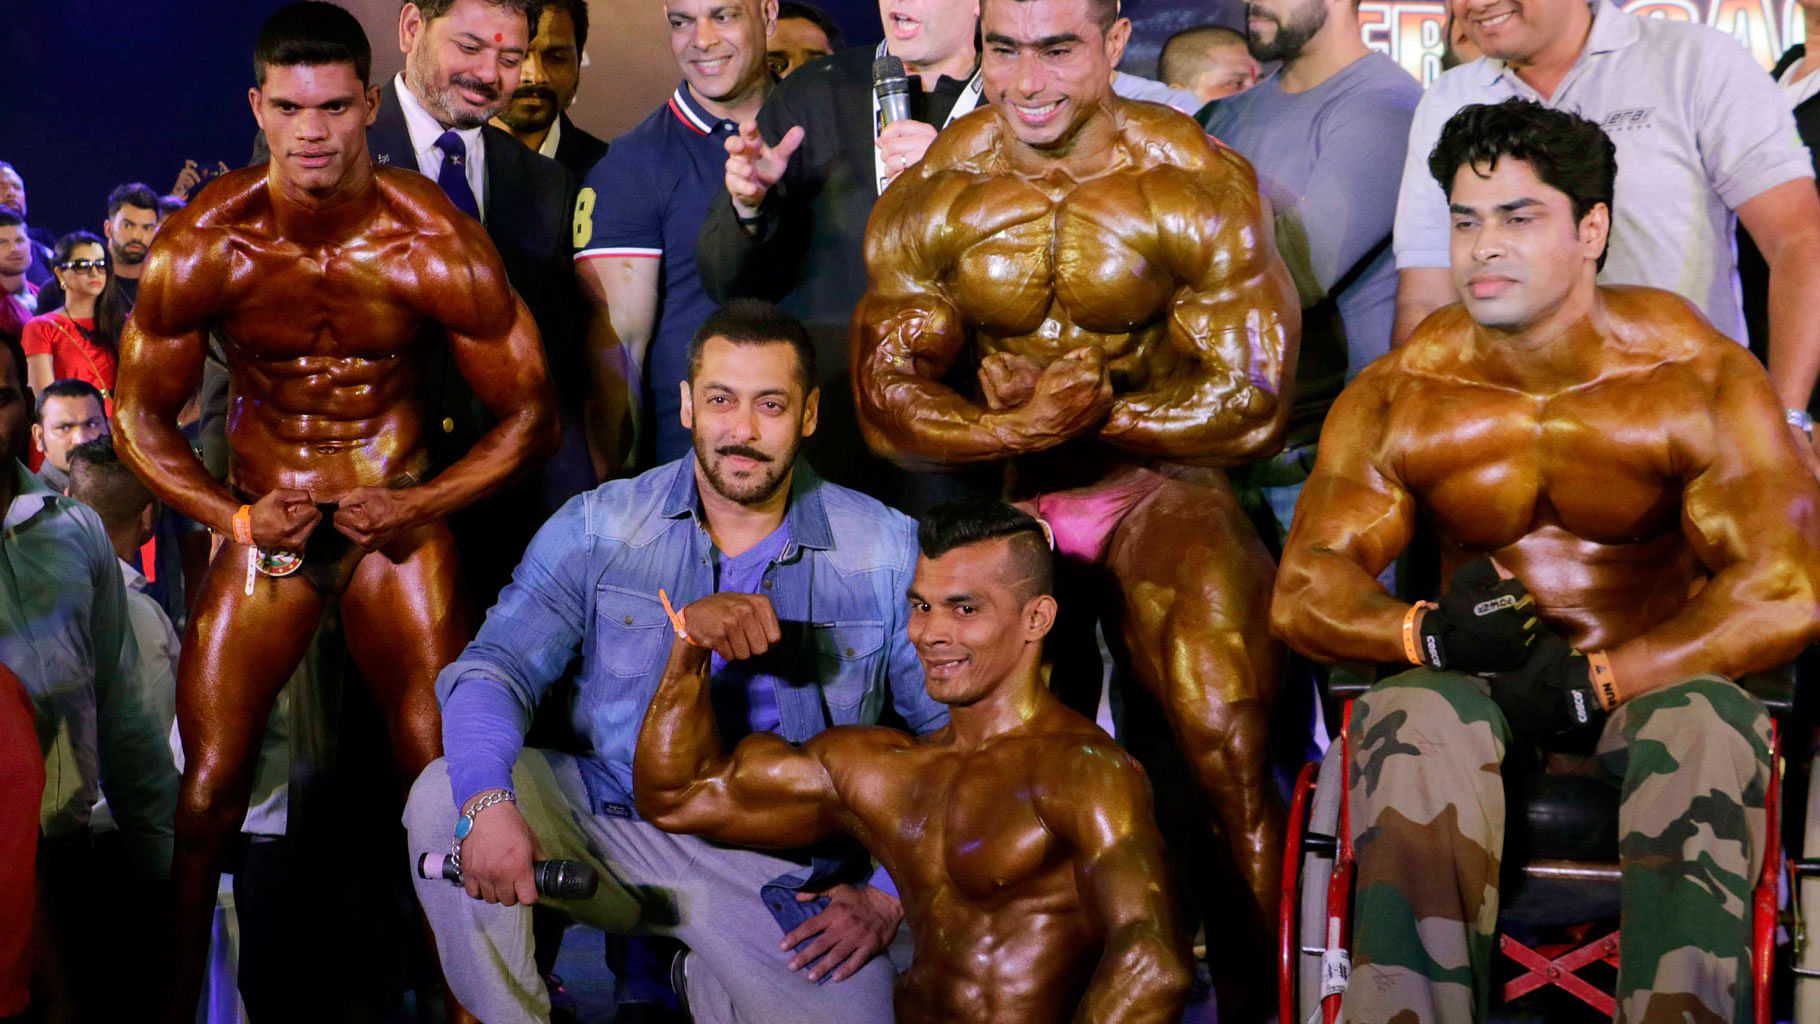 In Pics: Salman Khan Adds Muscle to a Body Building Championship